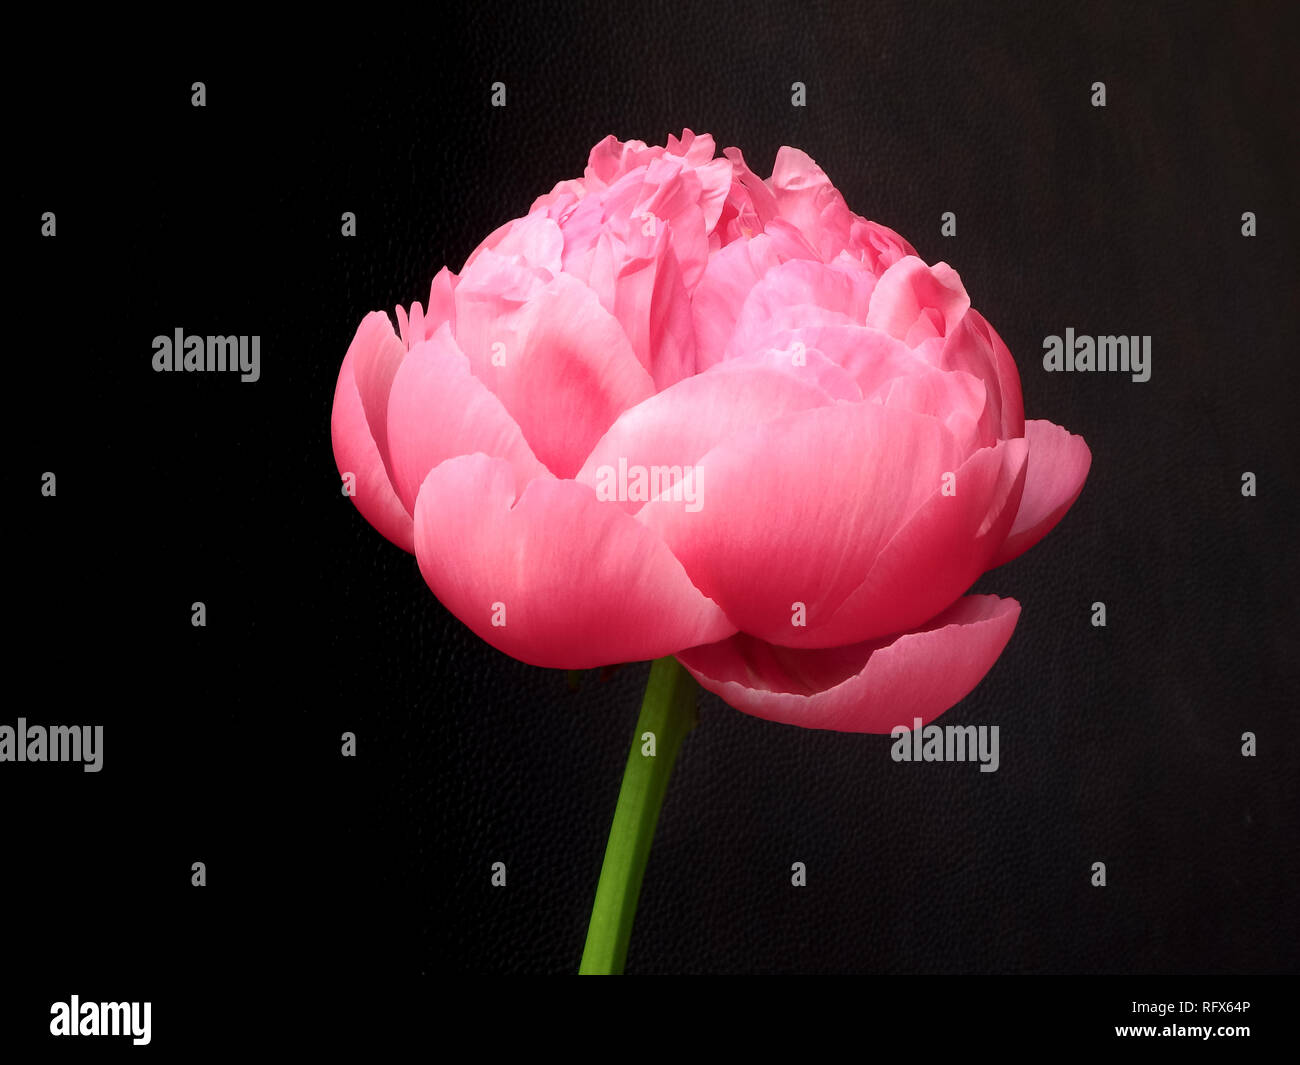 A single open, fragrant pink peony contrasts with a black background. Stock Photo